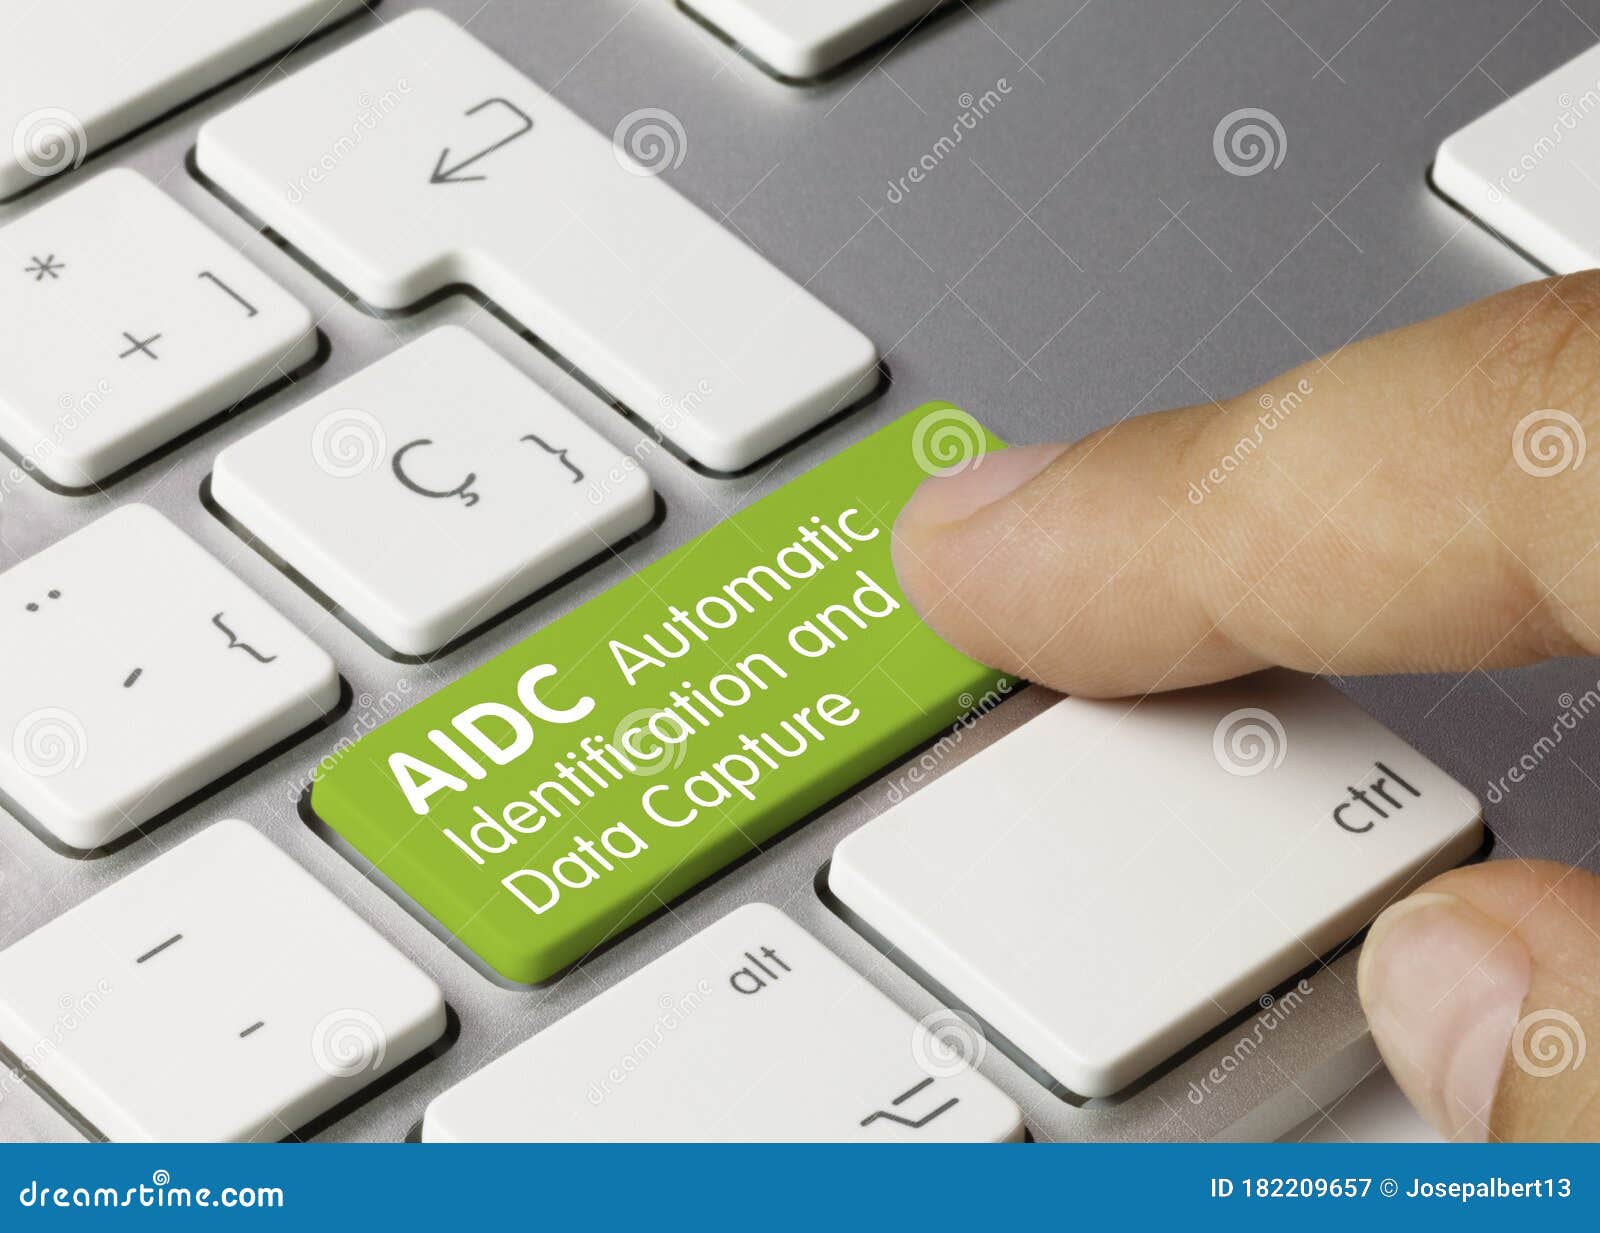 oosten Raffinaderij vaak AIDC Automatic Identification and Data Capture - Inscription on Green  Keyboard Key Stock Image - Image of cards, company: 182209657